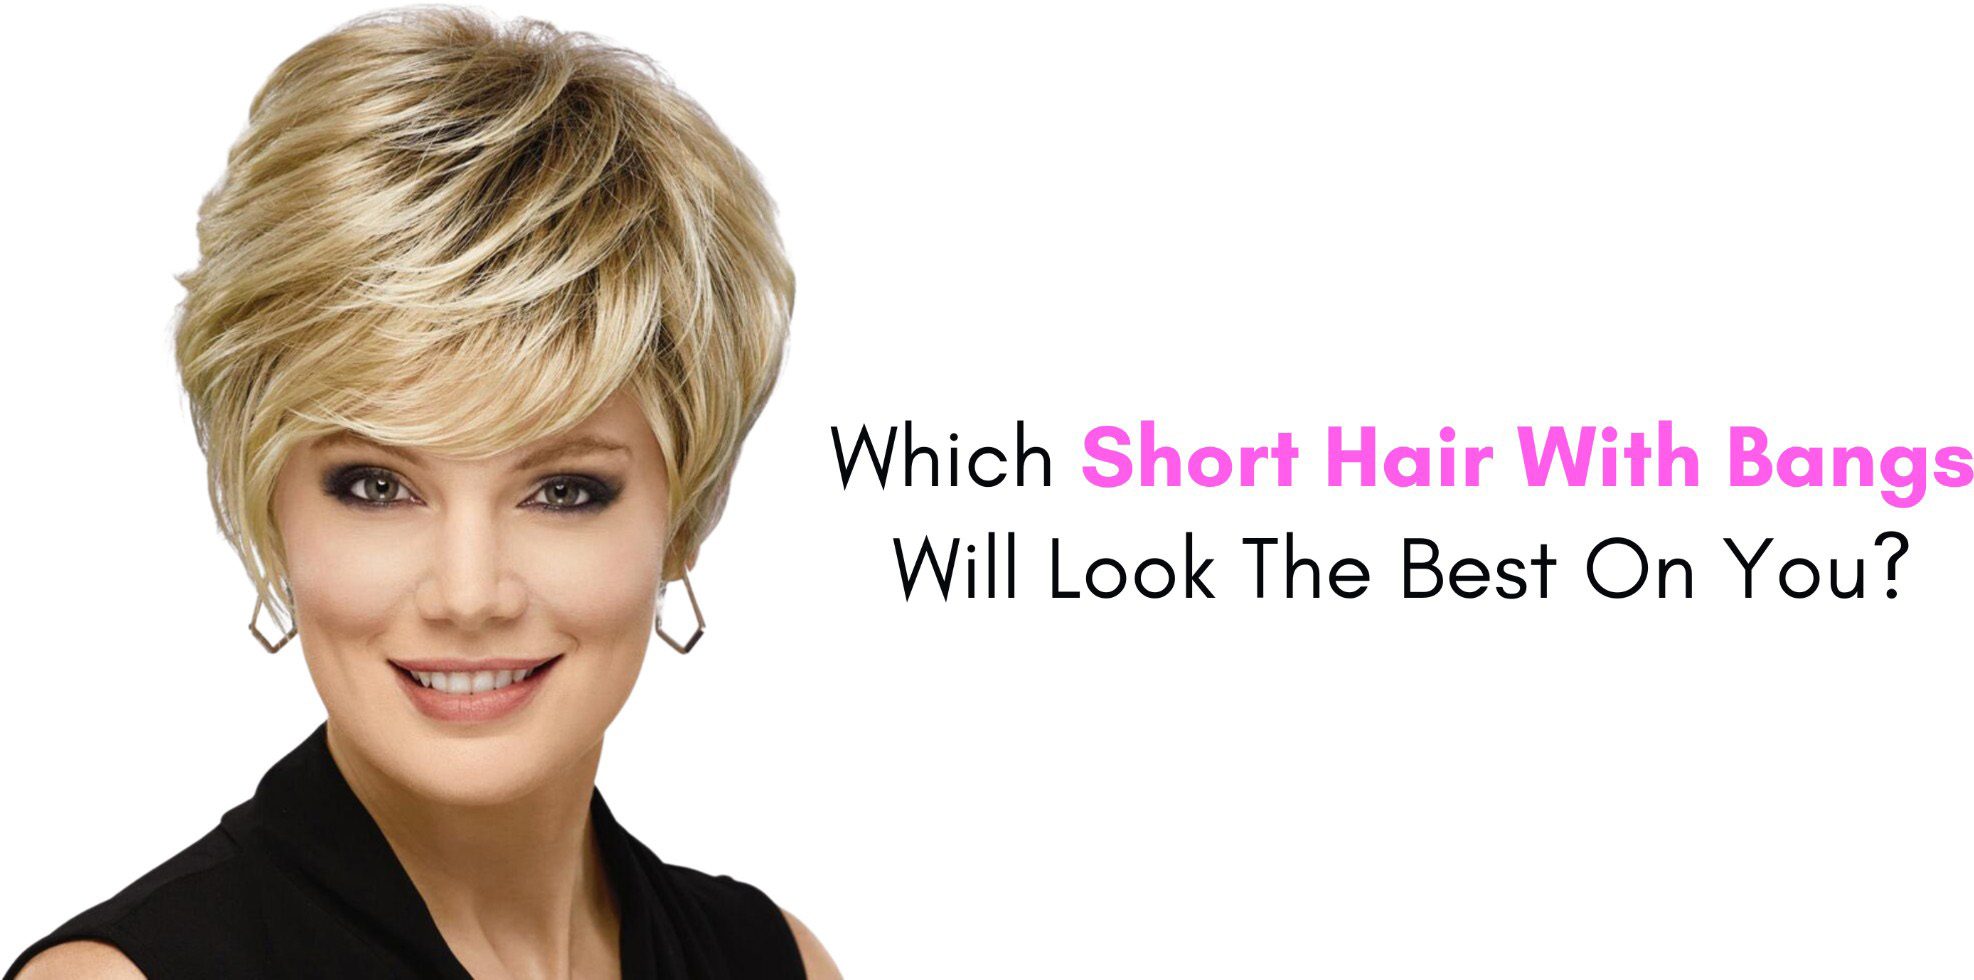 Which Short Hair With Bangs Will Look The Best On You?